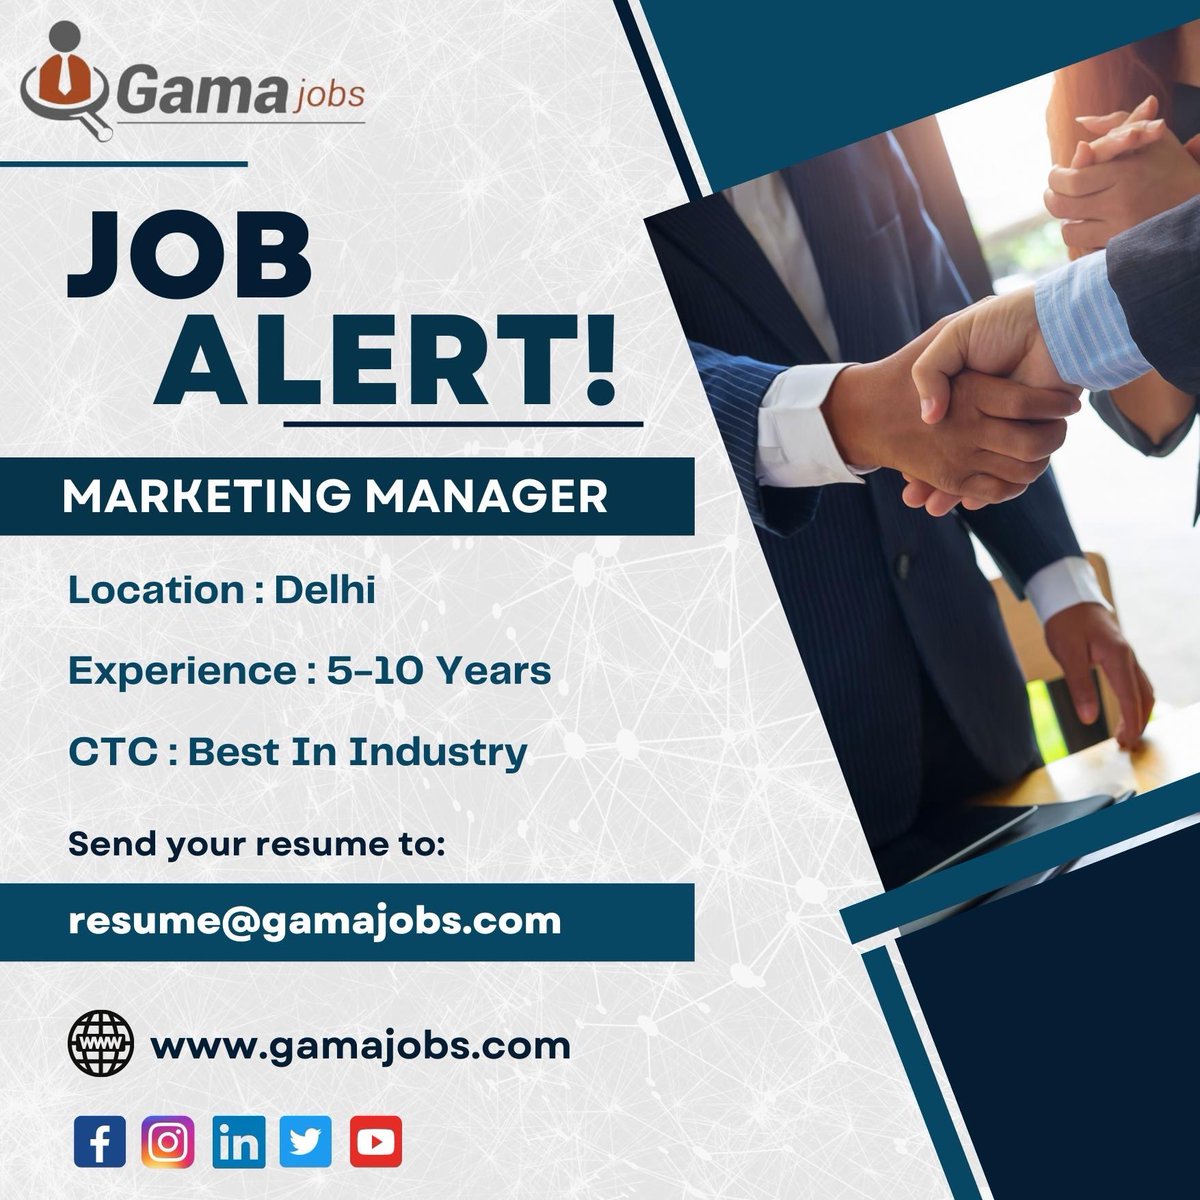 To apply,
Visit: gamajobs.com/job_detail/ind…
or email your resume to resume@gamajobs.com.
Visit our website gamajobs.com for more job updates and to explore our current openings.

#marketingmanager #delhijobs #hiringnow #bestinindustry #gamajobs  #linkedin #marketingjobs